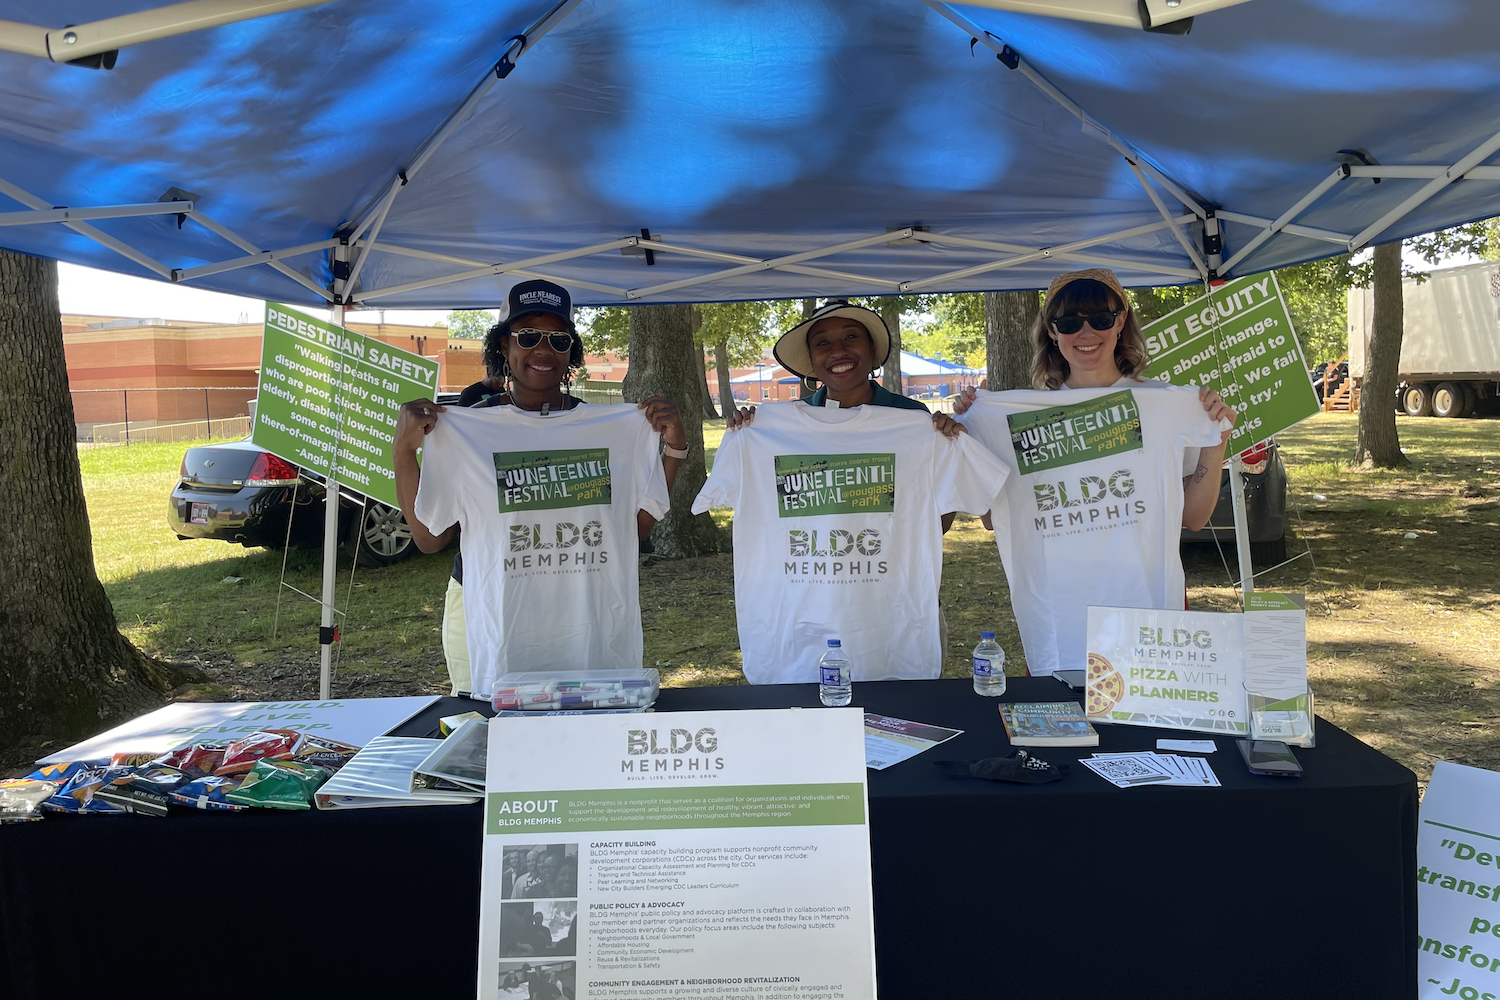 Charia Jackson, Frayser CDC Deputy Director, Courtney Thomas, BLDG Memphis Advocacy Manager, and Rachel Starks, Seeding Success Community Development Analyst (L to R), at the Juneteenth Freedom and Heritage Festival on Sunday, June 19, 2022.